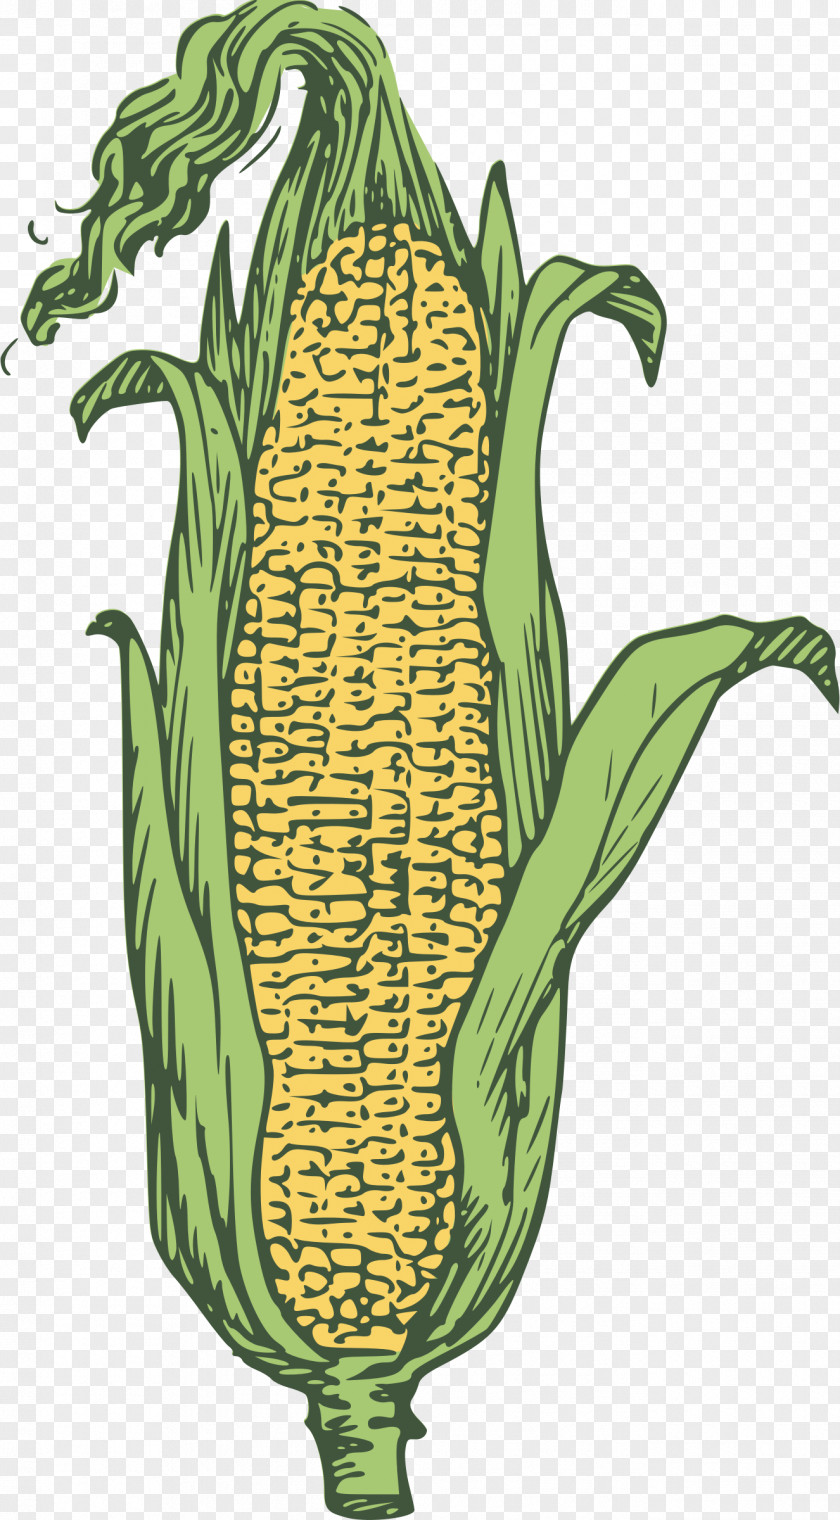 Ear Of Corn Clipart Candy On The Cob Popcorn Maize PNG